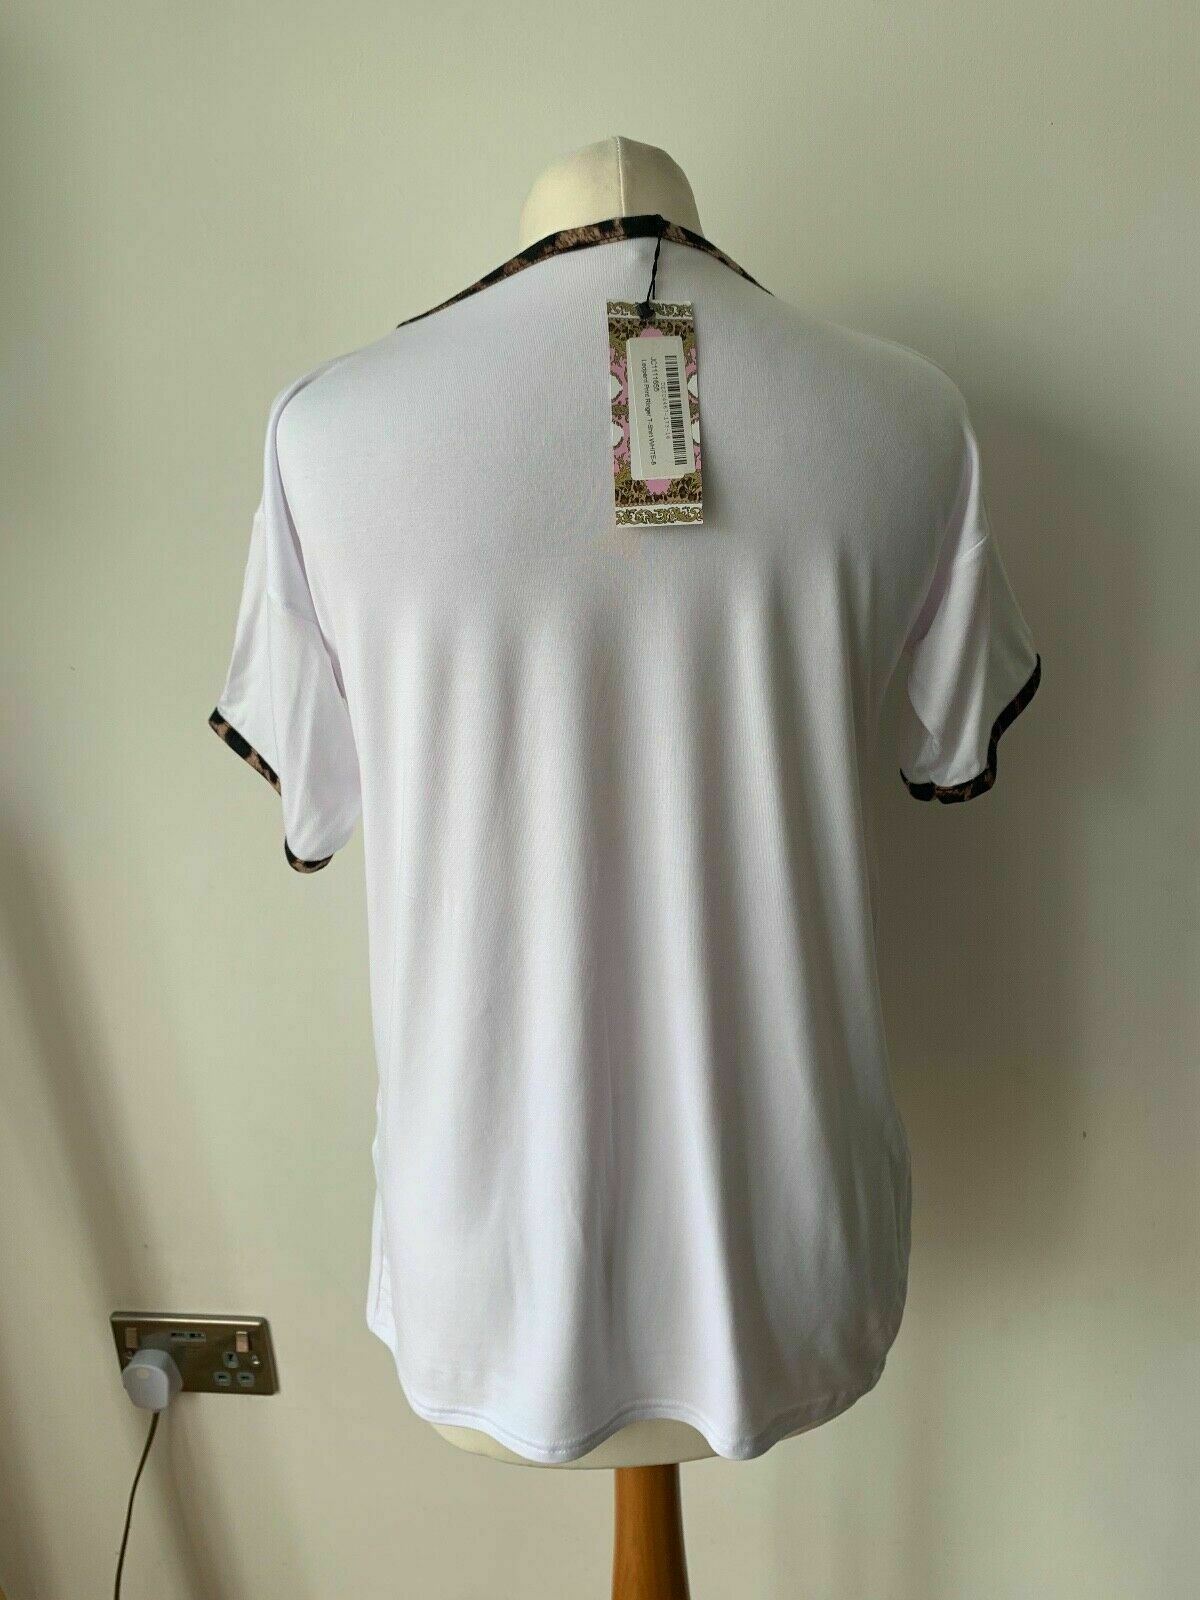 Boohoo White T-shirt with leopard print trim Size 8